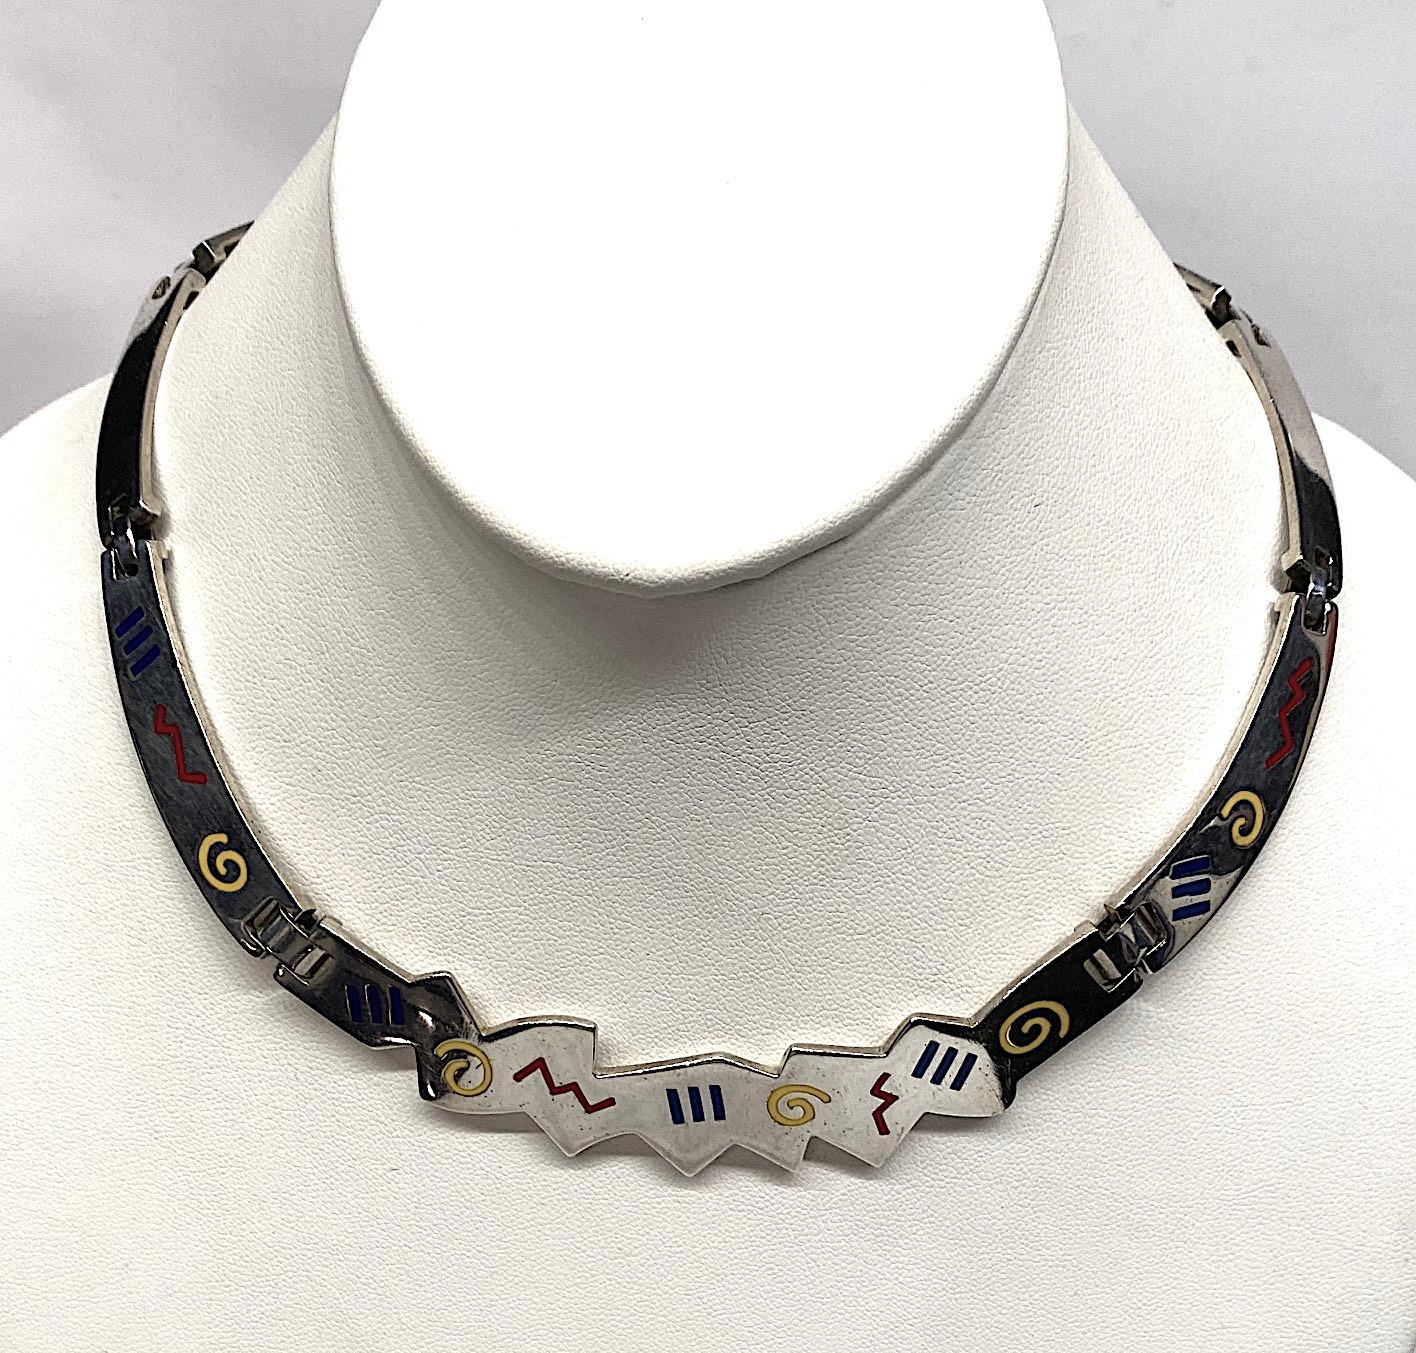 A one of a kind artist made Memphis style post modernist sterling necklace with enamel accent from the 1980s. The necklace has a nice weight  of 85 grams and is beautifully executed in 9 flat links 2mm or 1/16 of an inch thick. It is 16.5 inches in